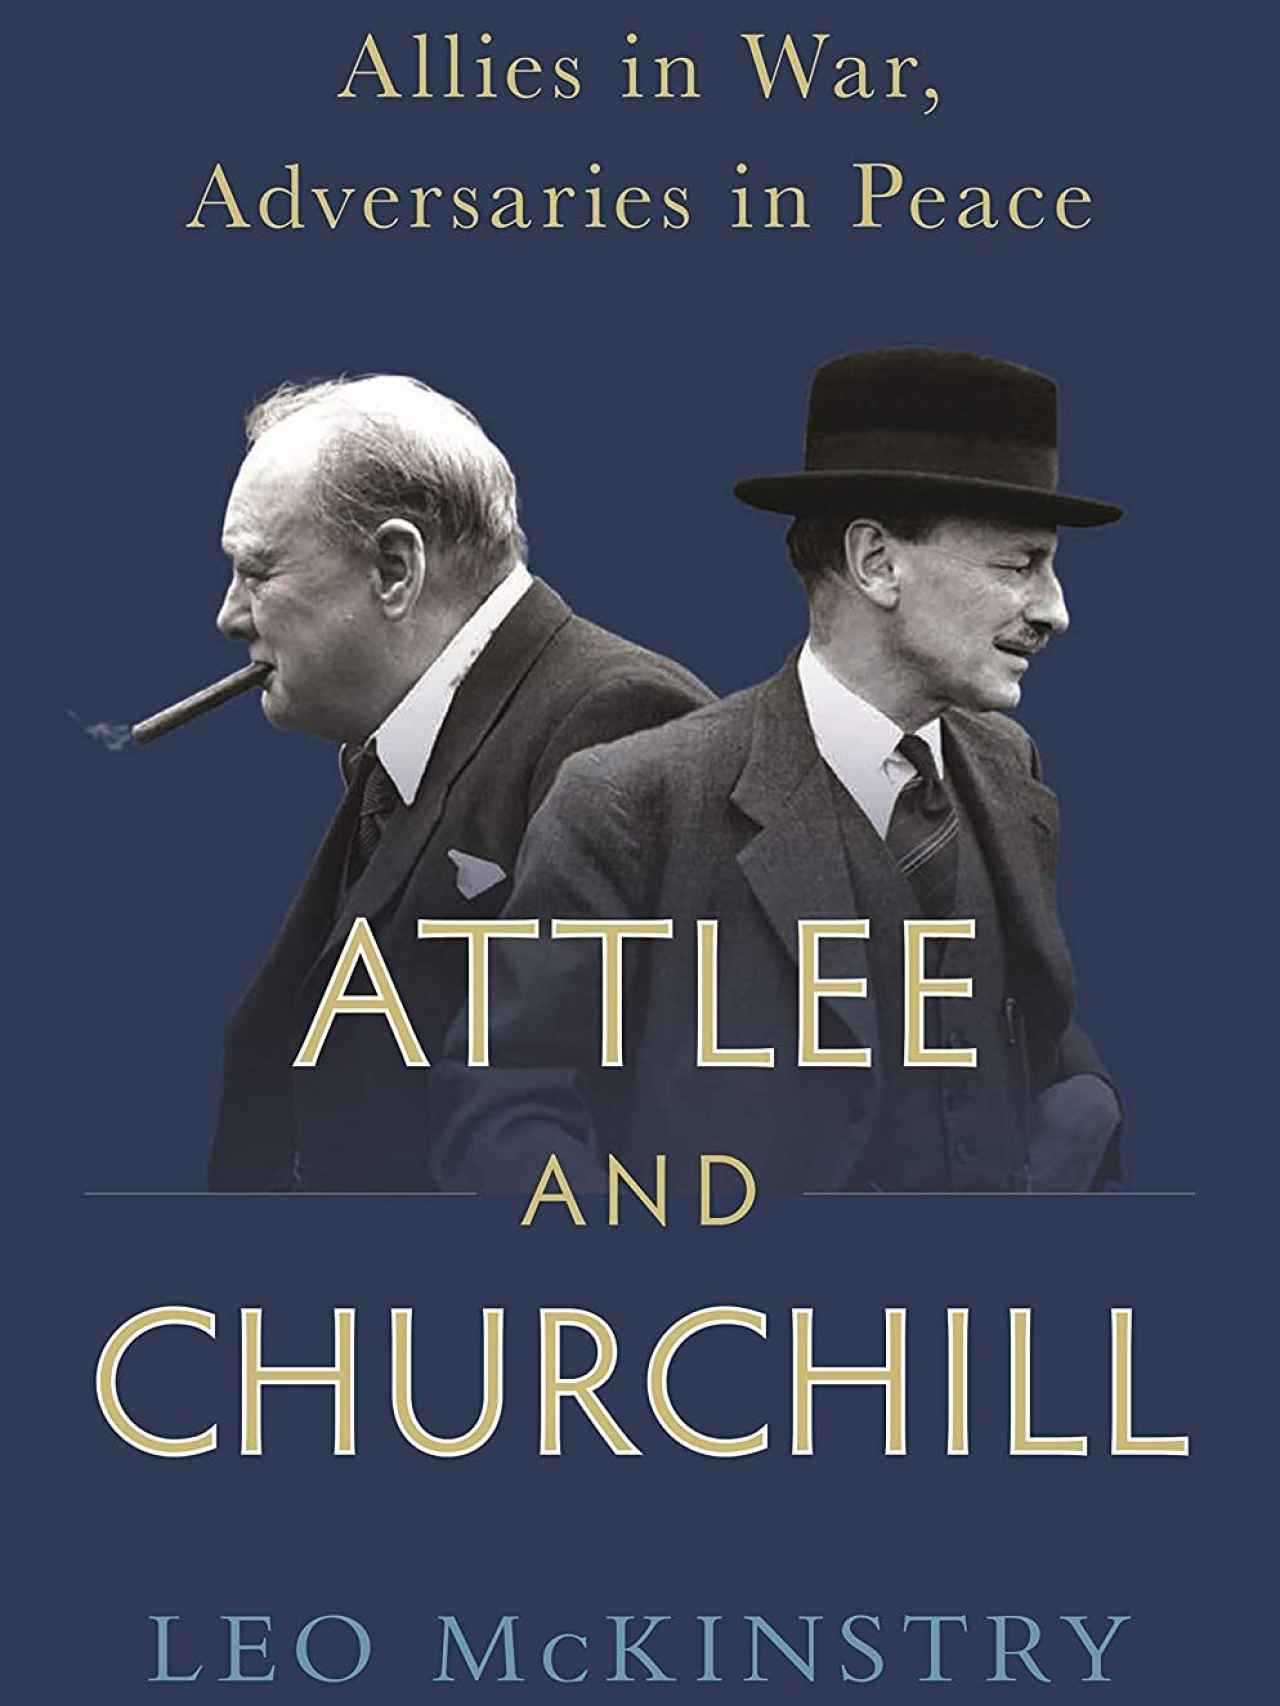 Attlee and Churchill: Allies in War, Adversaries in Peace.